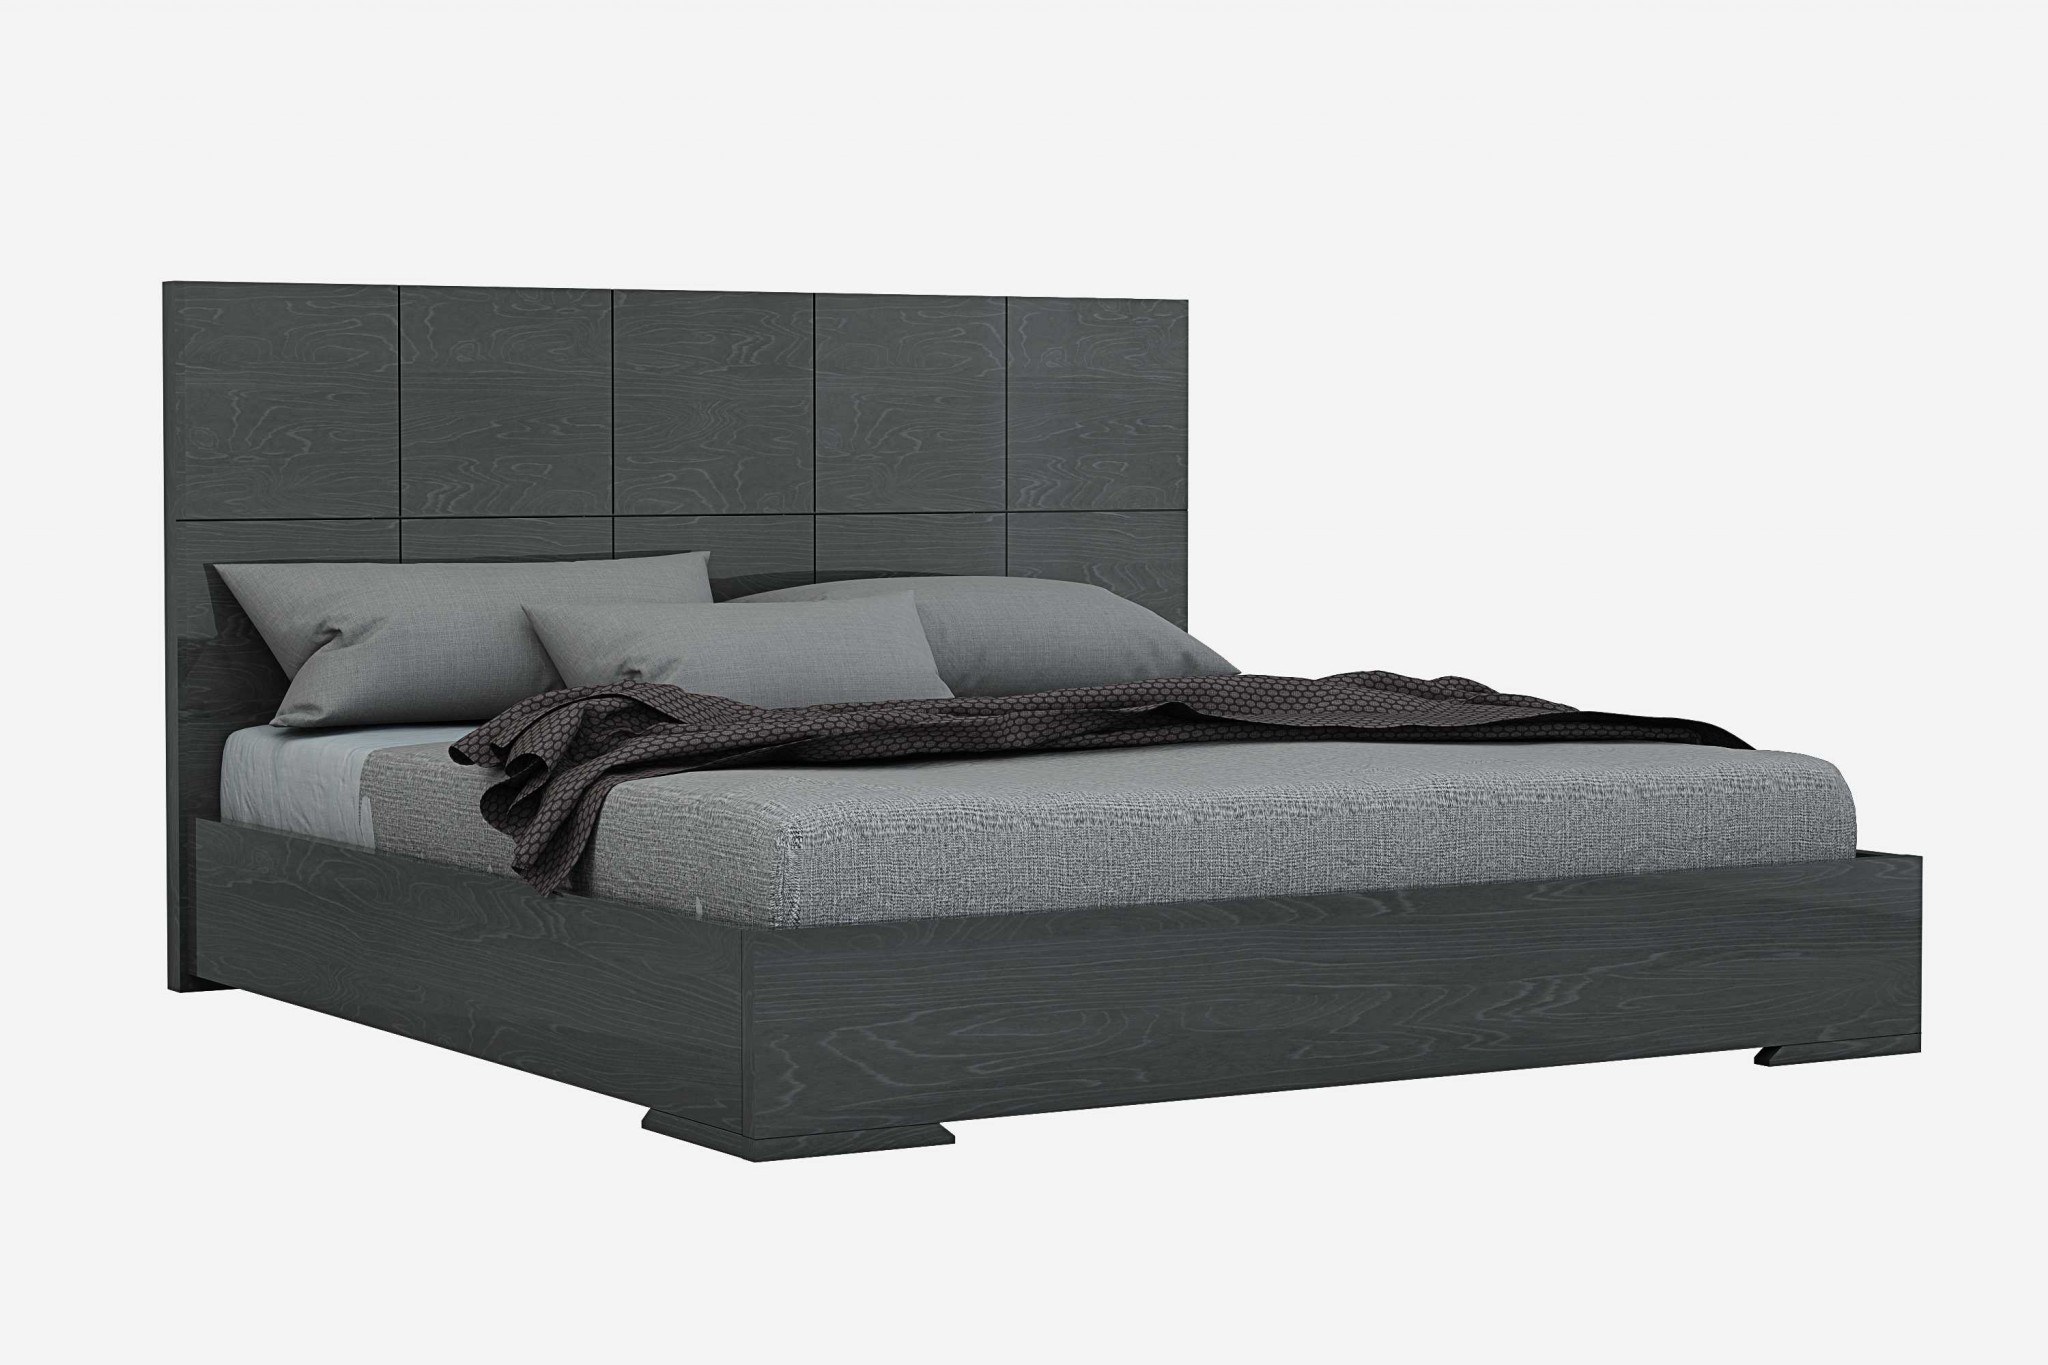 81" X 85" X 42" Gray Stainless Steel King Bed